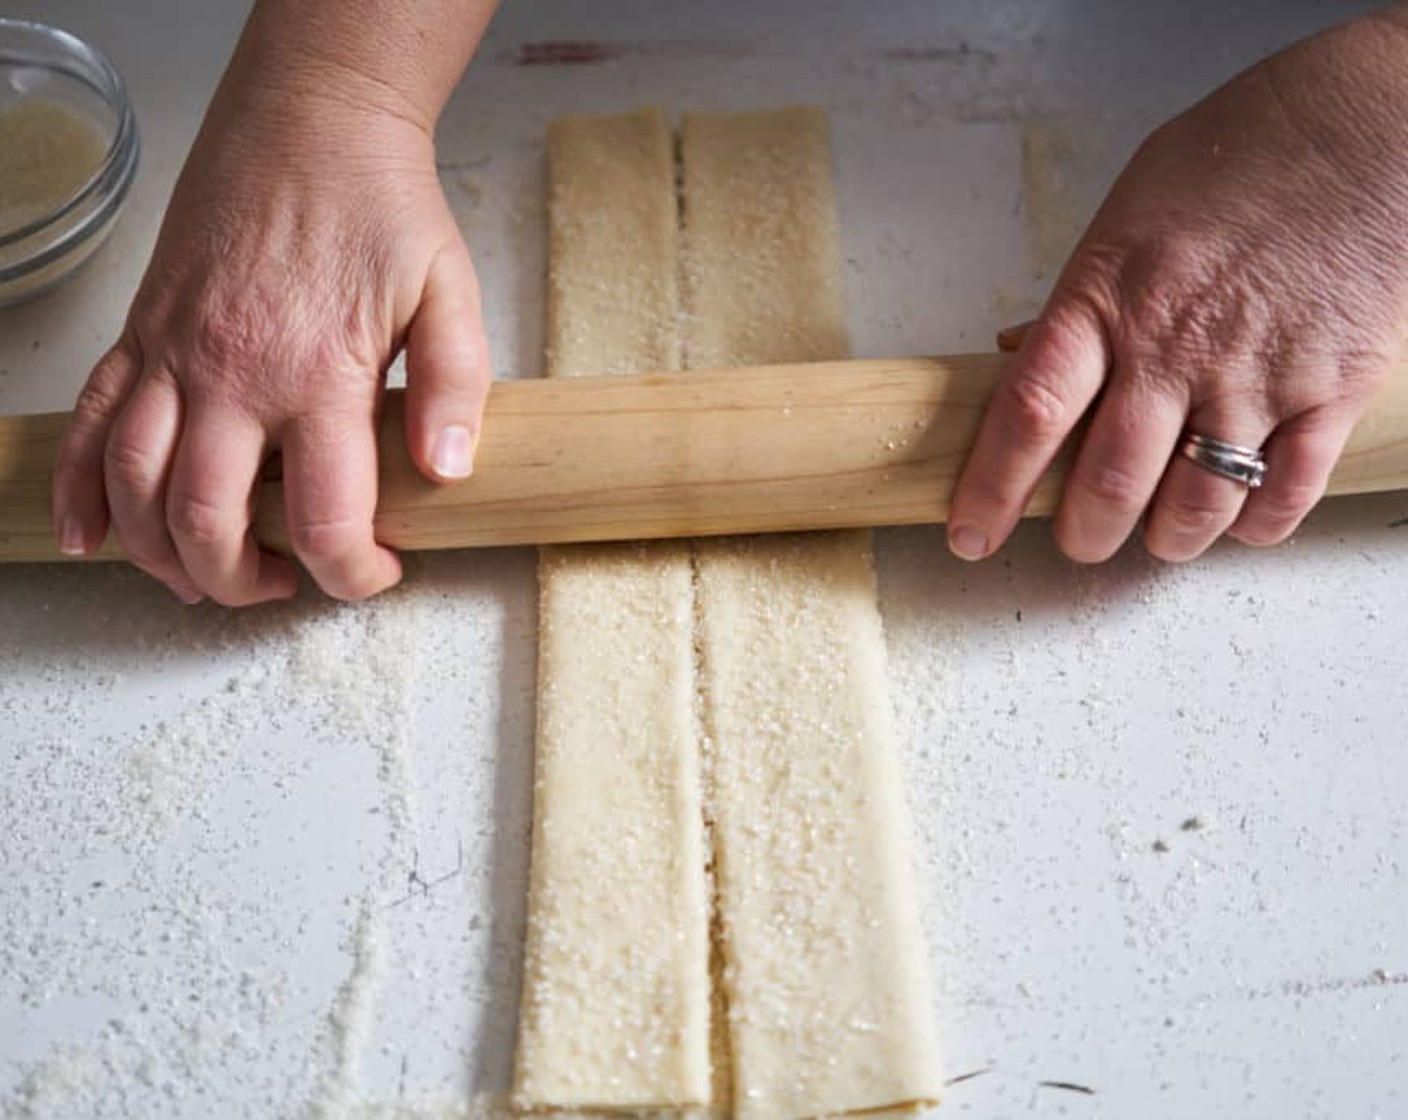 step 4 Using a rolling pin, gently roll down the sheet of puff pastry to deepen the creases so the rectangle will hold the shape. You don’t want it unfolding again!